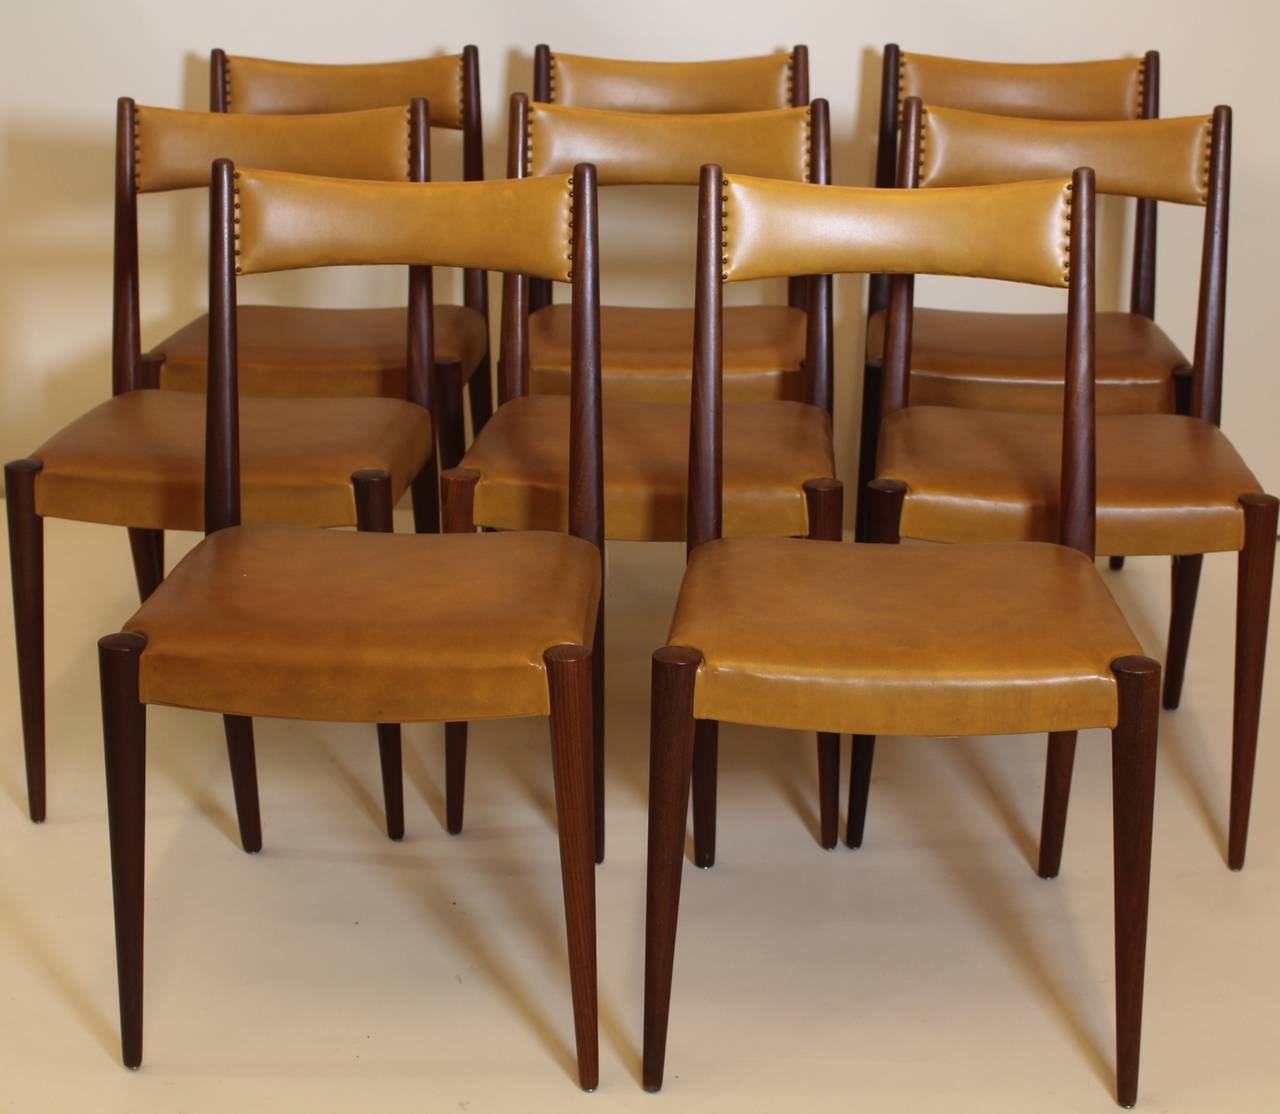 Mid century modern brown beech dining room chairs, set of 8,  1953, designed by Anna-Lülja Praun (1906 - 2004), Vienna and executed by Wiesner-Hager, Austria.
In the 1950s Anna-Lülja Praun created many designs for the furniture store 